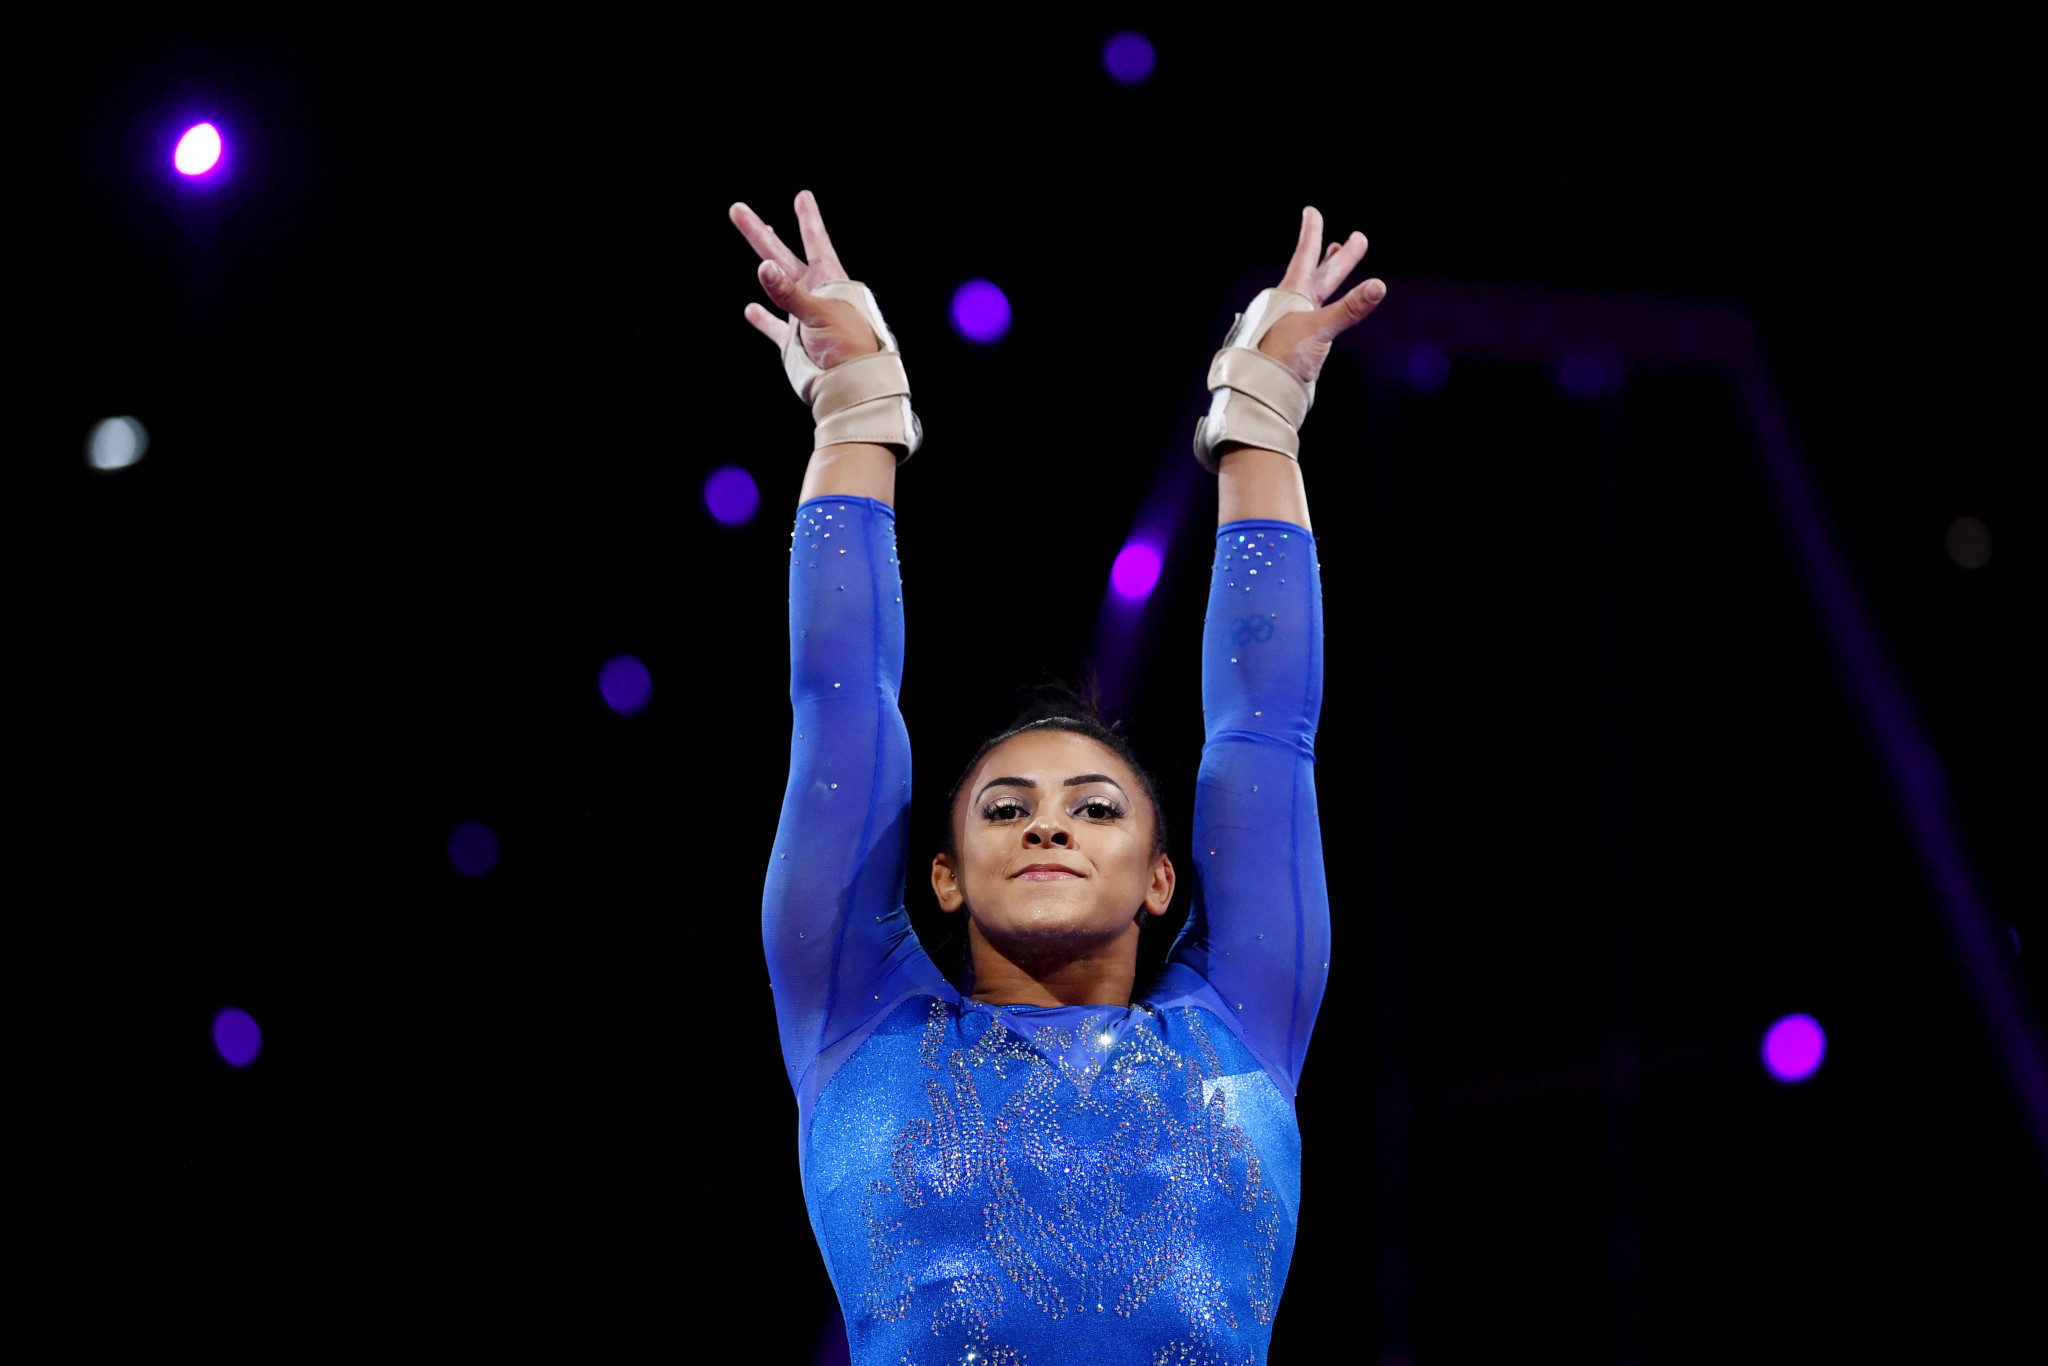 Becky and Ellie Downie claim abusive behaviour has been "normalised" in gymnastics